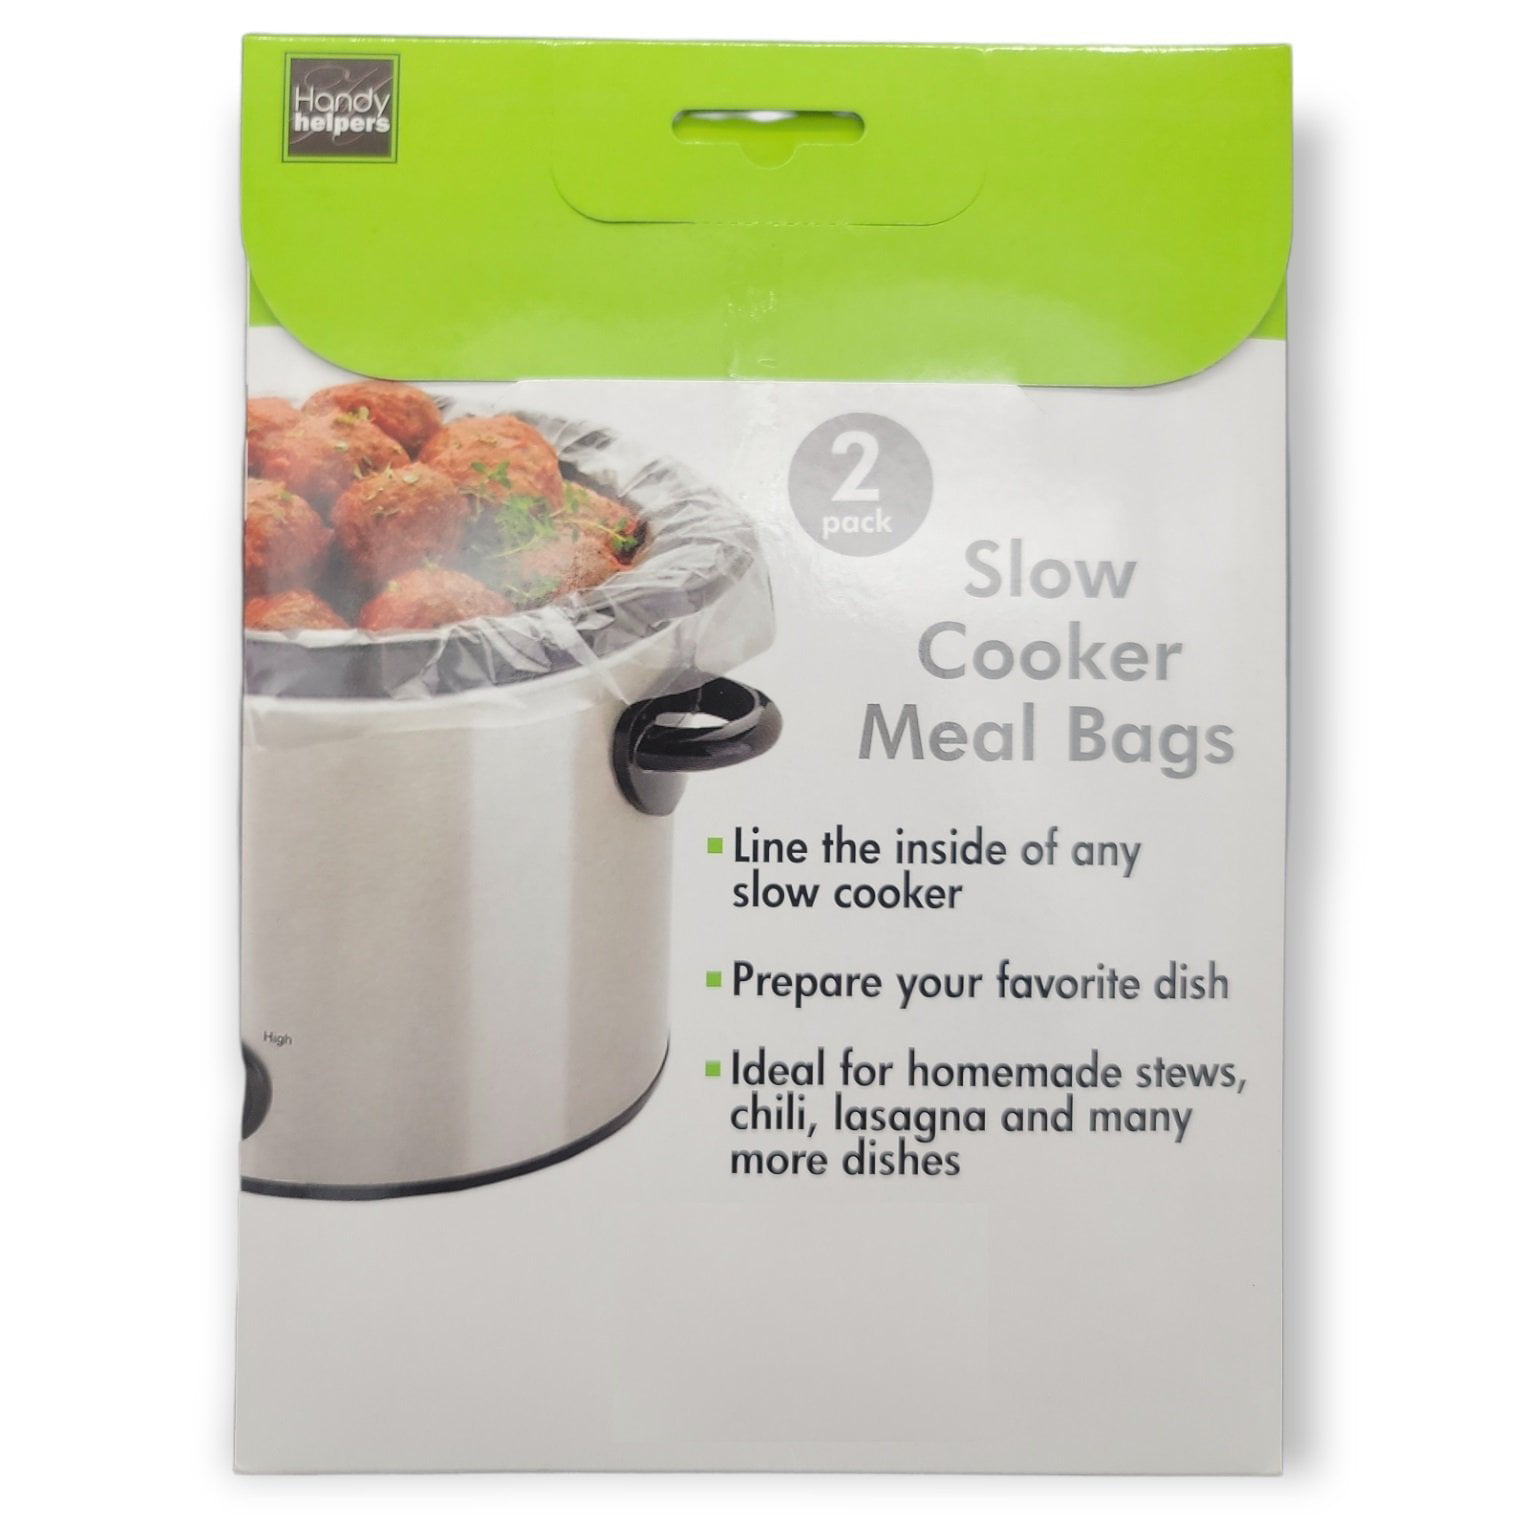 30 Count Large Crock Pot & Slow Cooker Liners - 22”x12” 3 to 7 Quart Easy  Clean Up Plastic Bags for Crockpot, Aluminum Cooking Trays, Pans -  Non-Stick